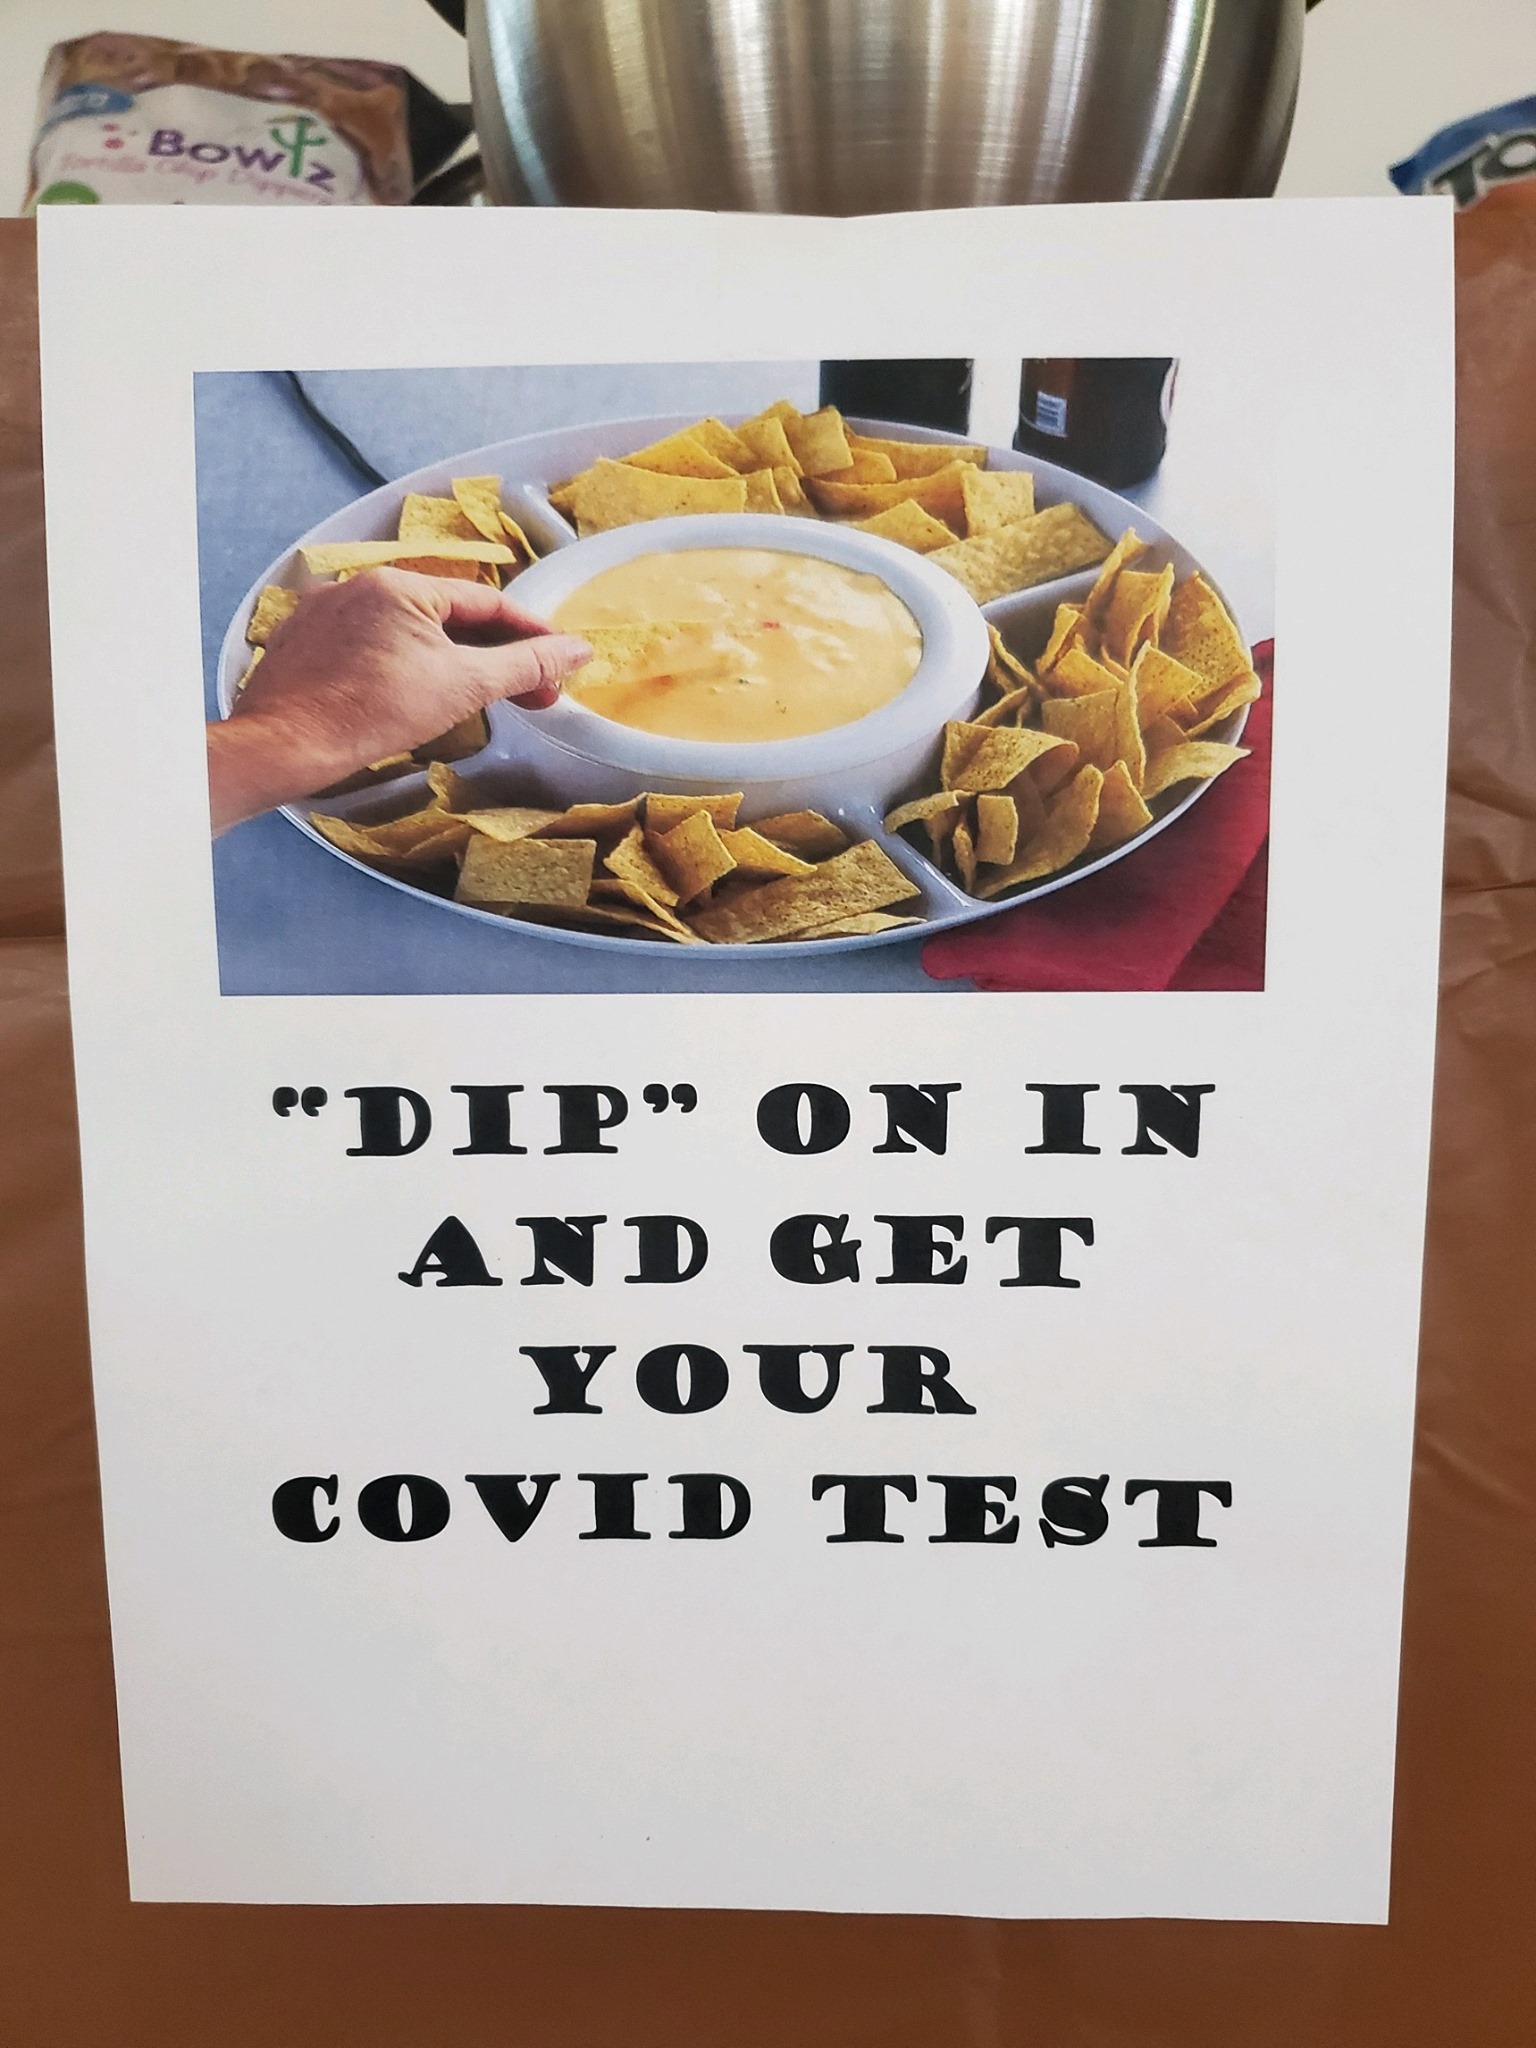 Dip on in and get your covid test